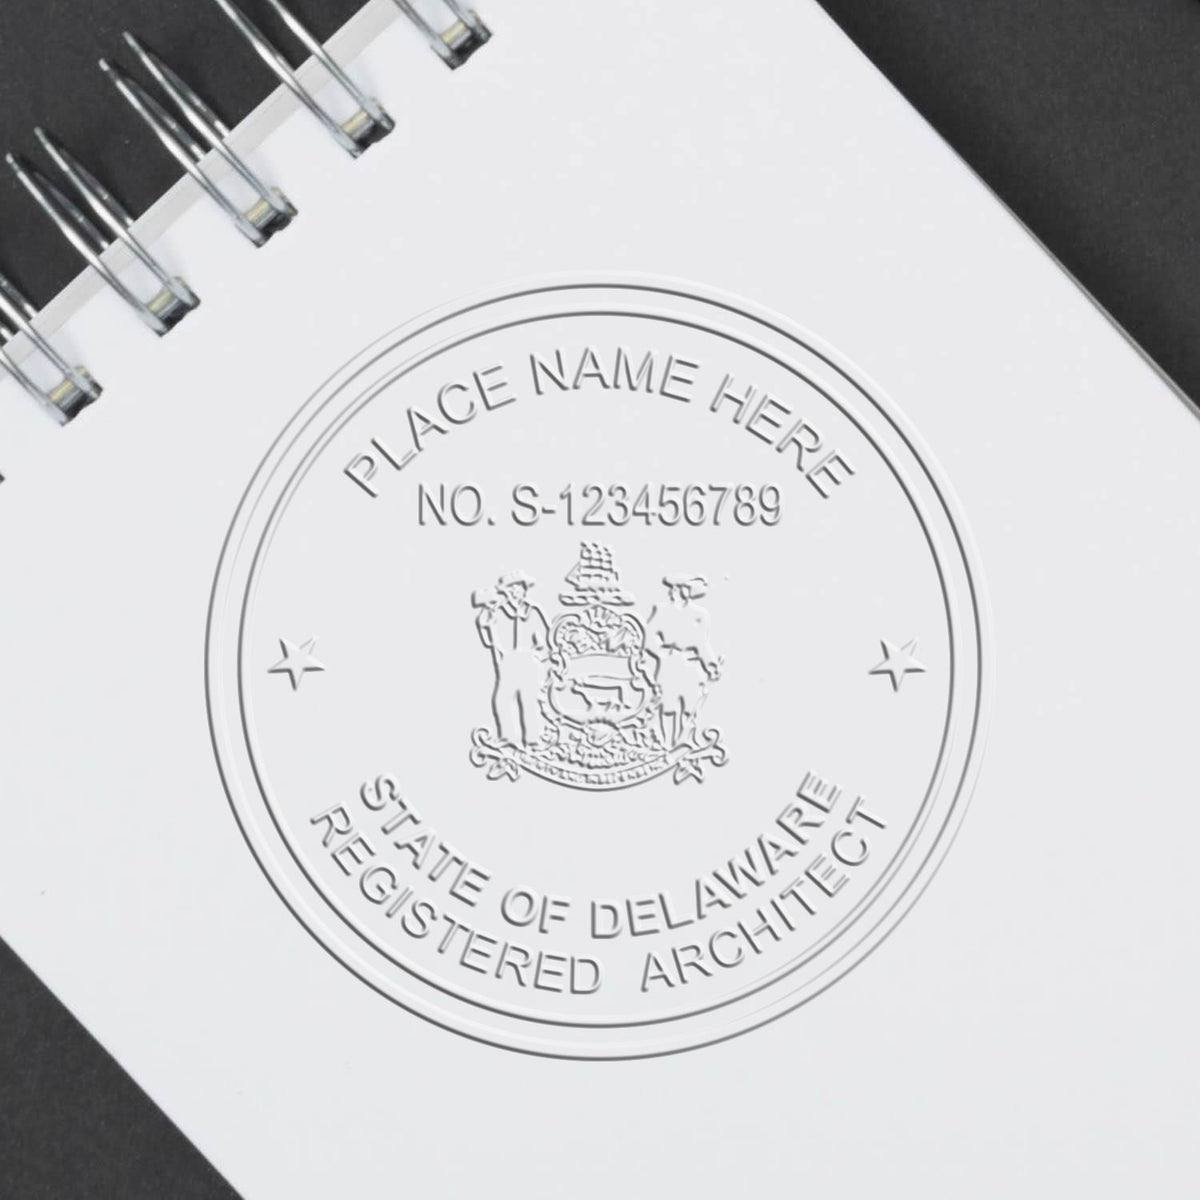 The State of Delaware Architectural Seal Embosser stamp impression comes to life with a crisp, detailed photo on paper - showcasing true professional quality.